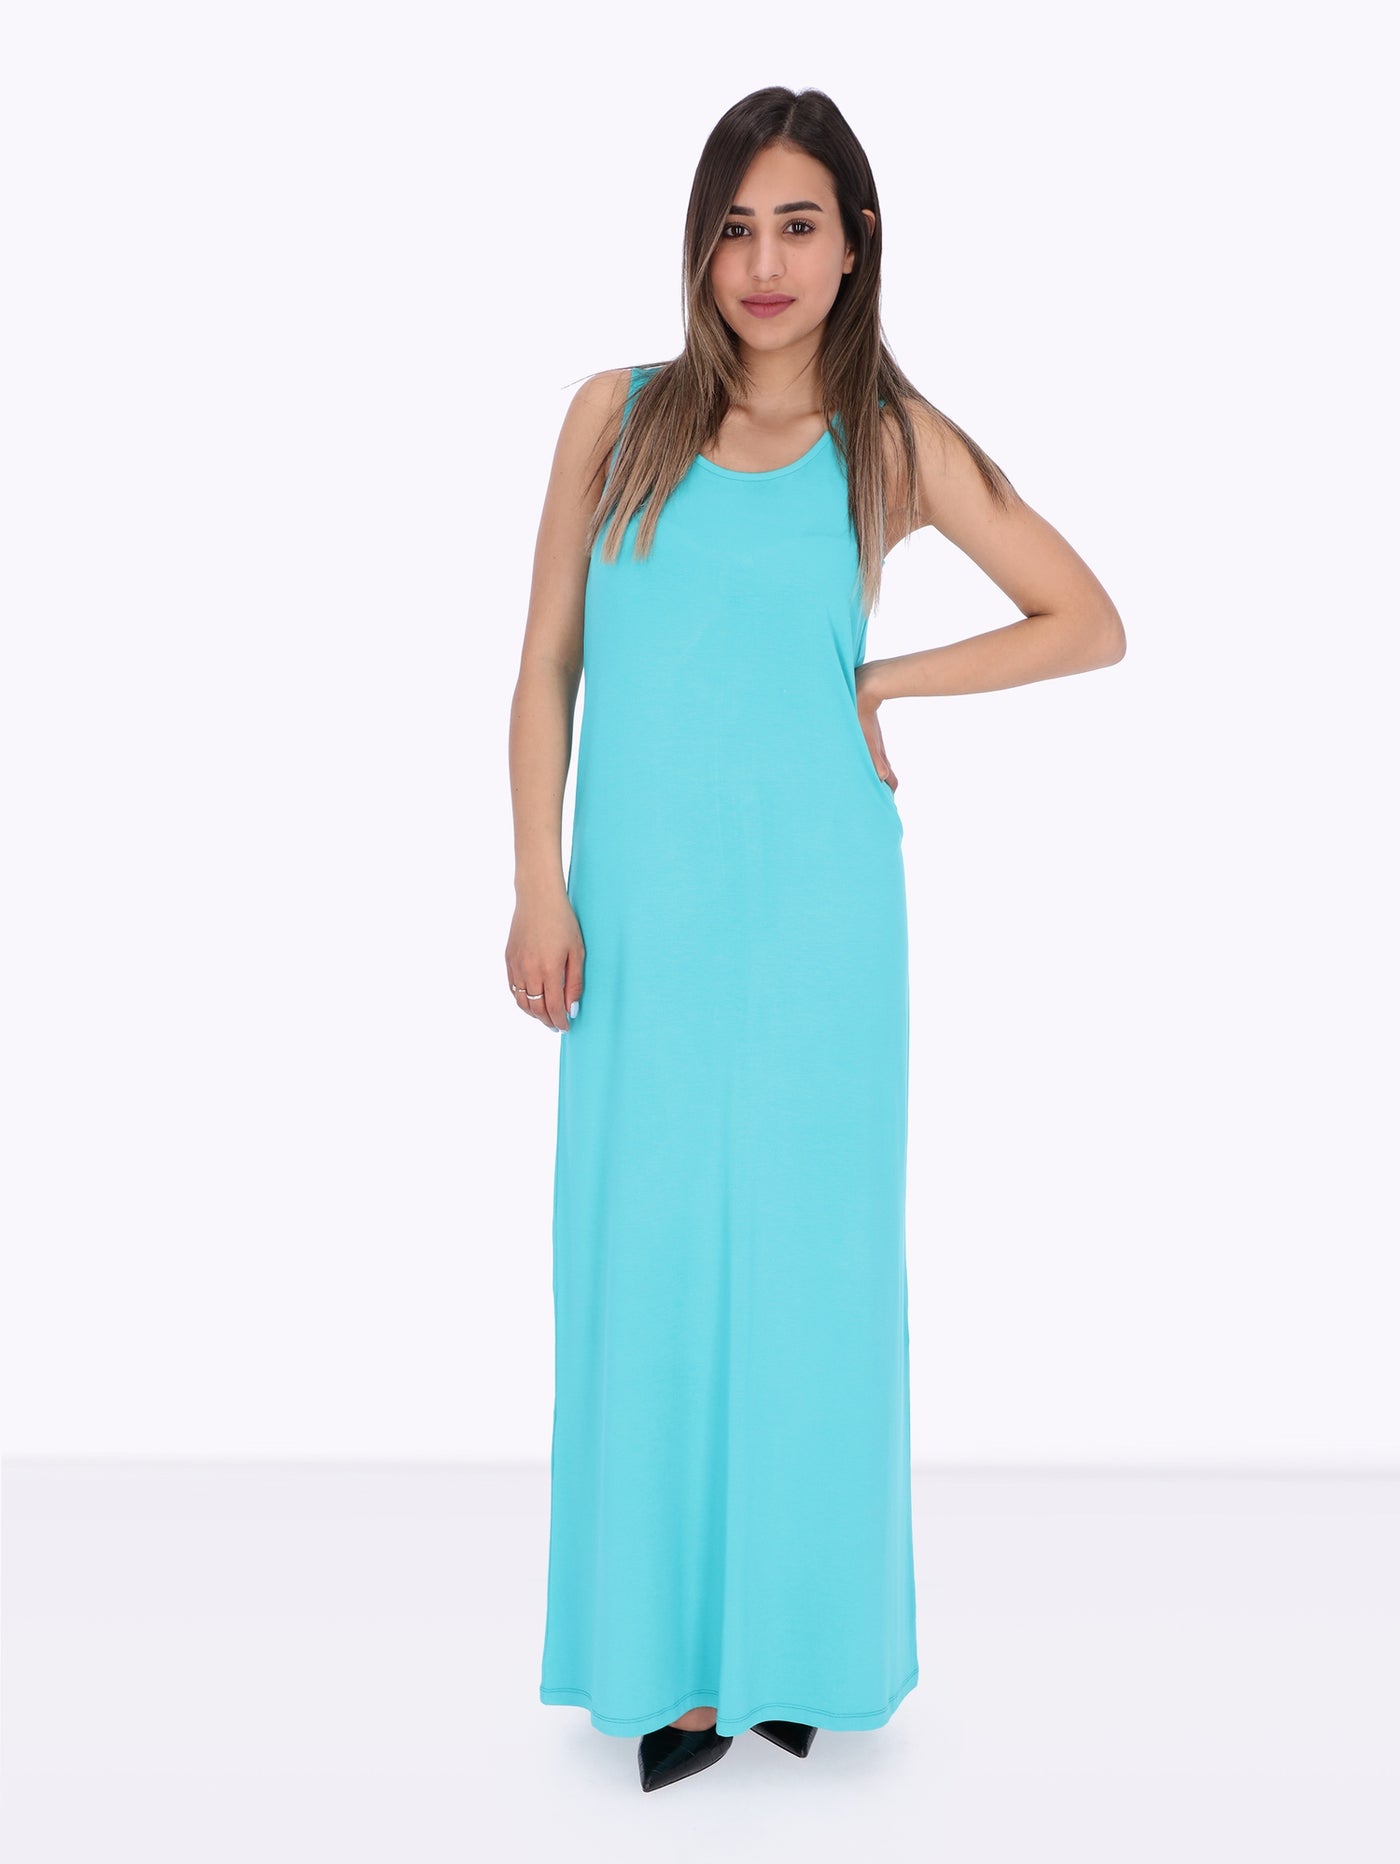 OR Women's Strappy Back Maxi Dress